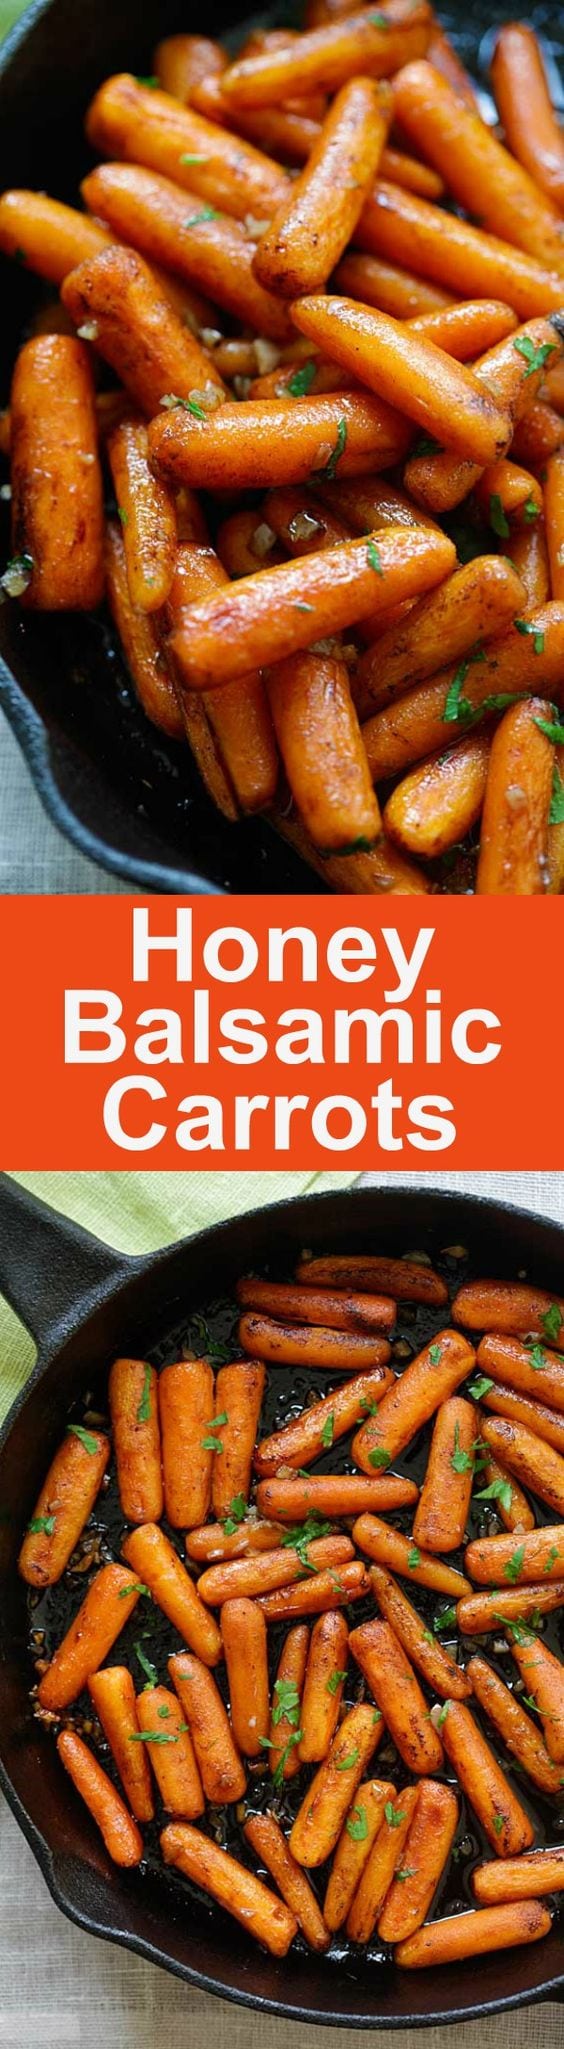 Honey Balsamic Carrots - oven-roasted carrots with honey balsamic glaze. The easiest and best balsamic carrots recipe ever | rasamalaysia.com